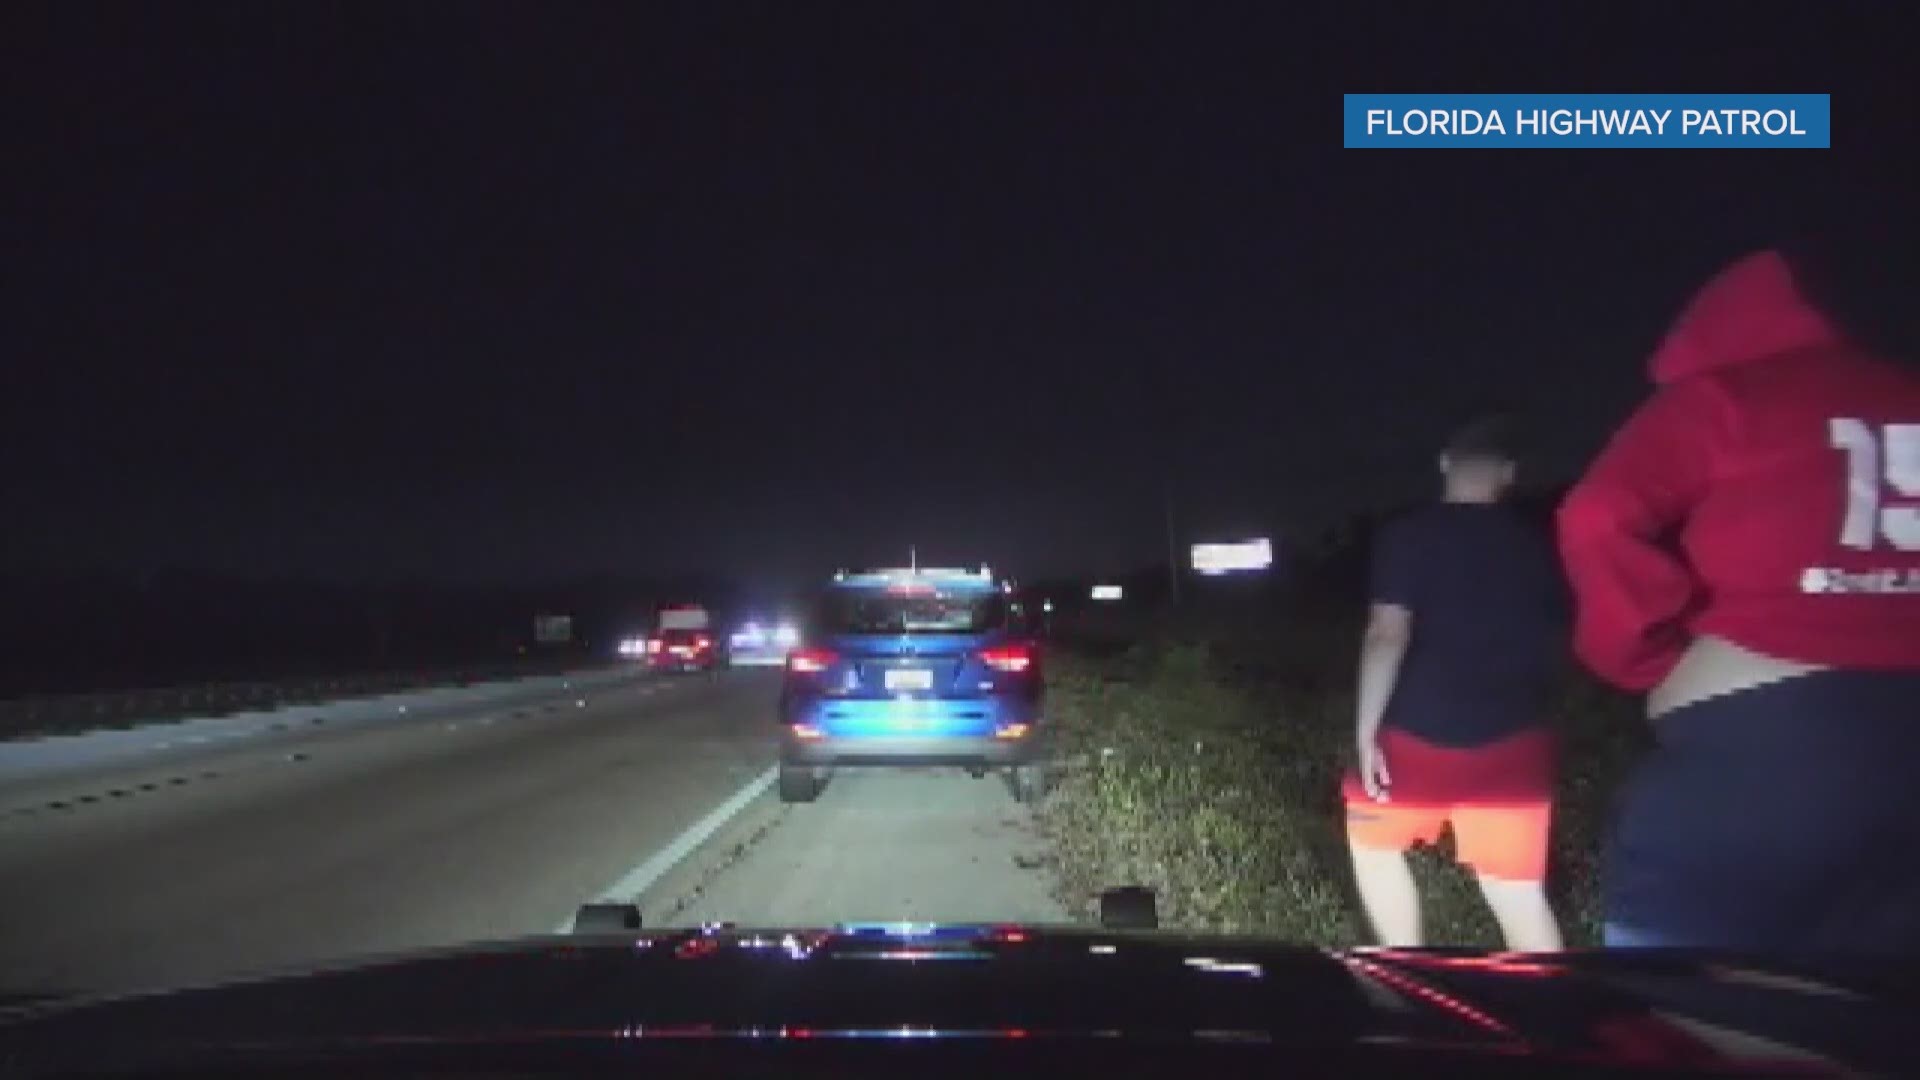 Florida Highway Patrol releases video that shows the moment a semi crashed into a Polk County patrol car and pushed it into a group of people on the side of the road